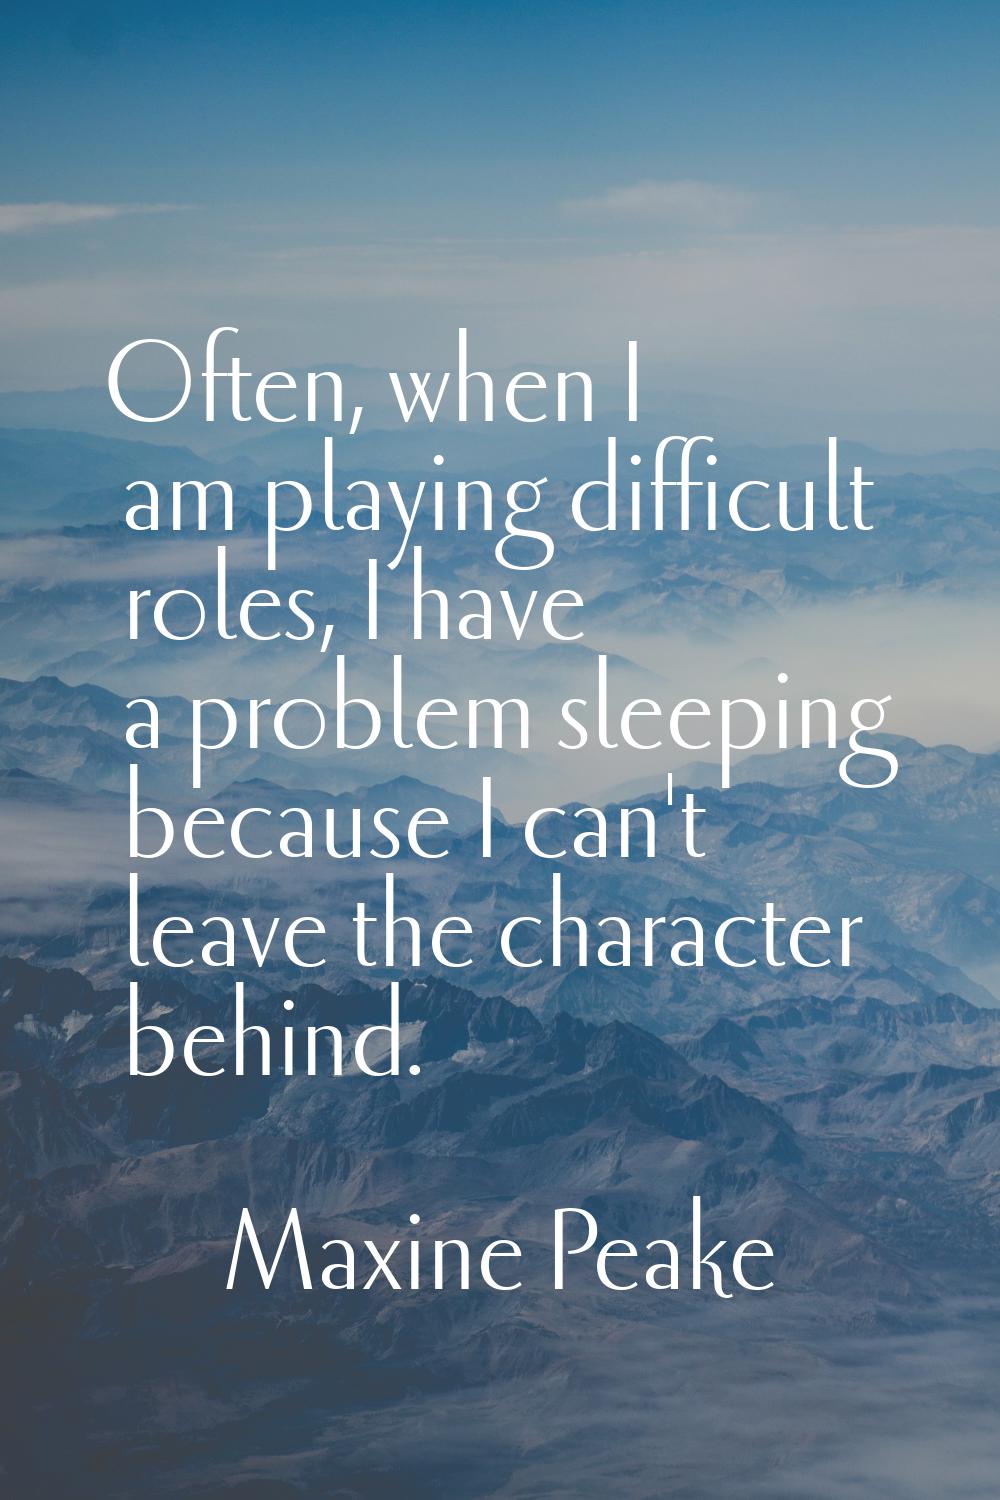 Often, when I am playing difficult roles, I have a problem sleeping because I can't leave the chara